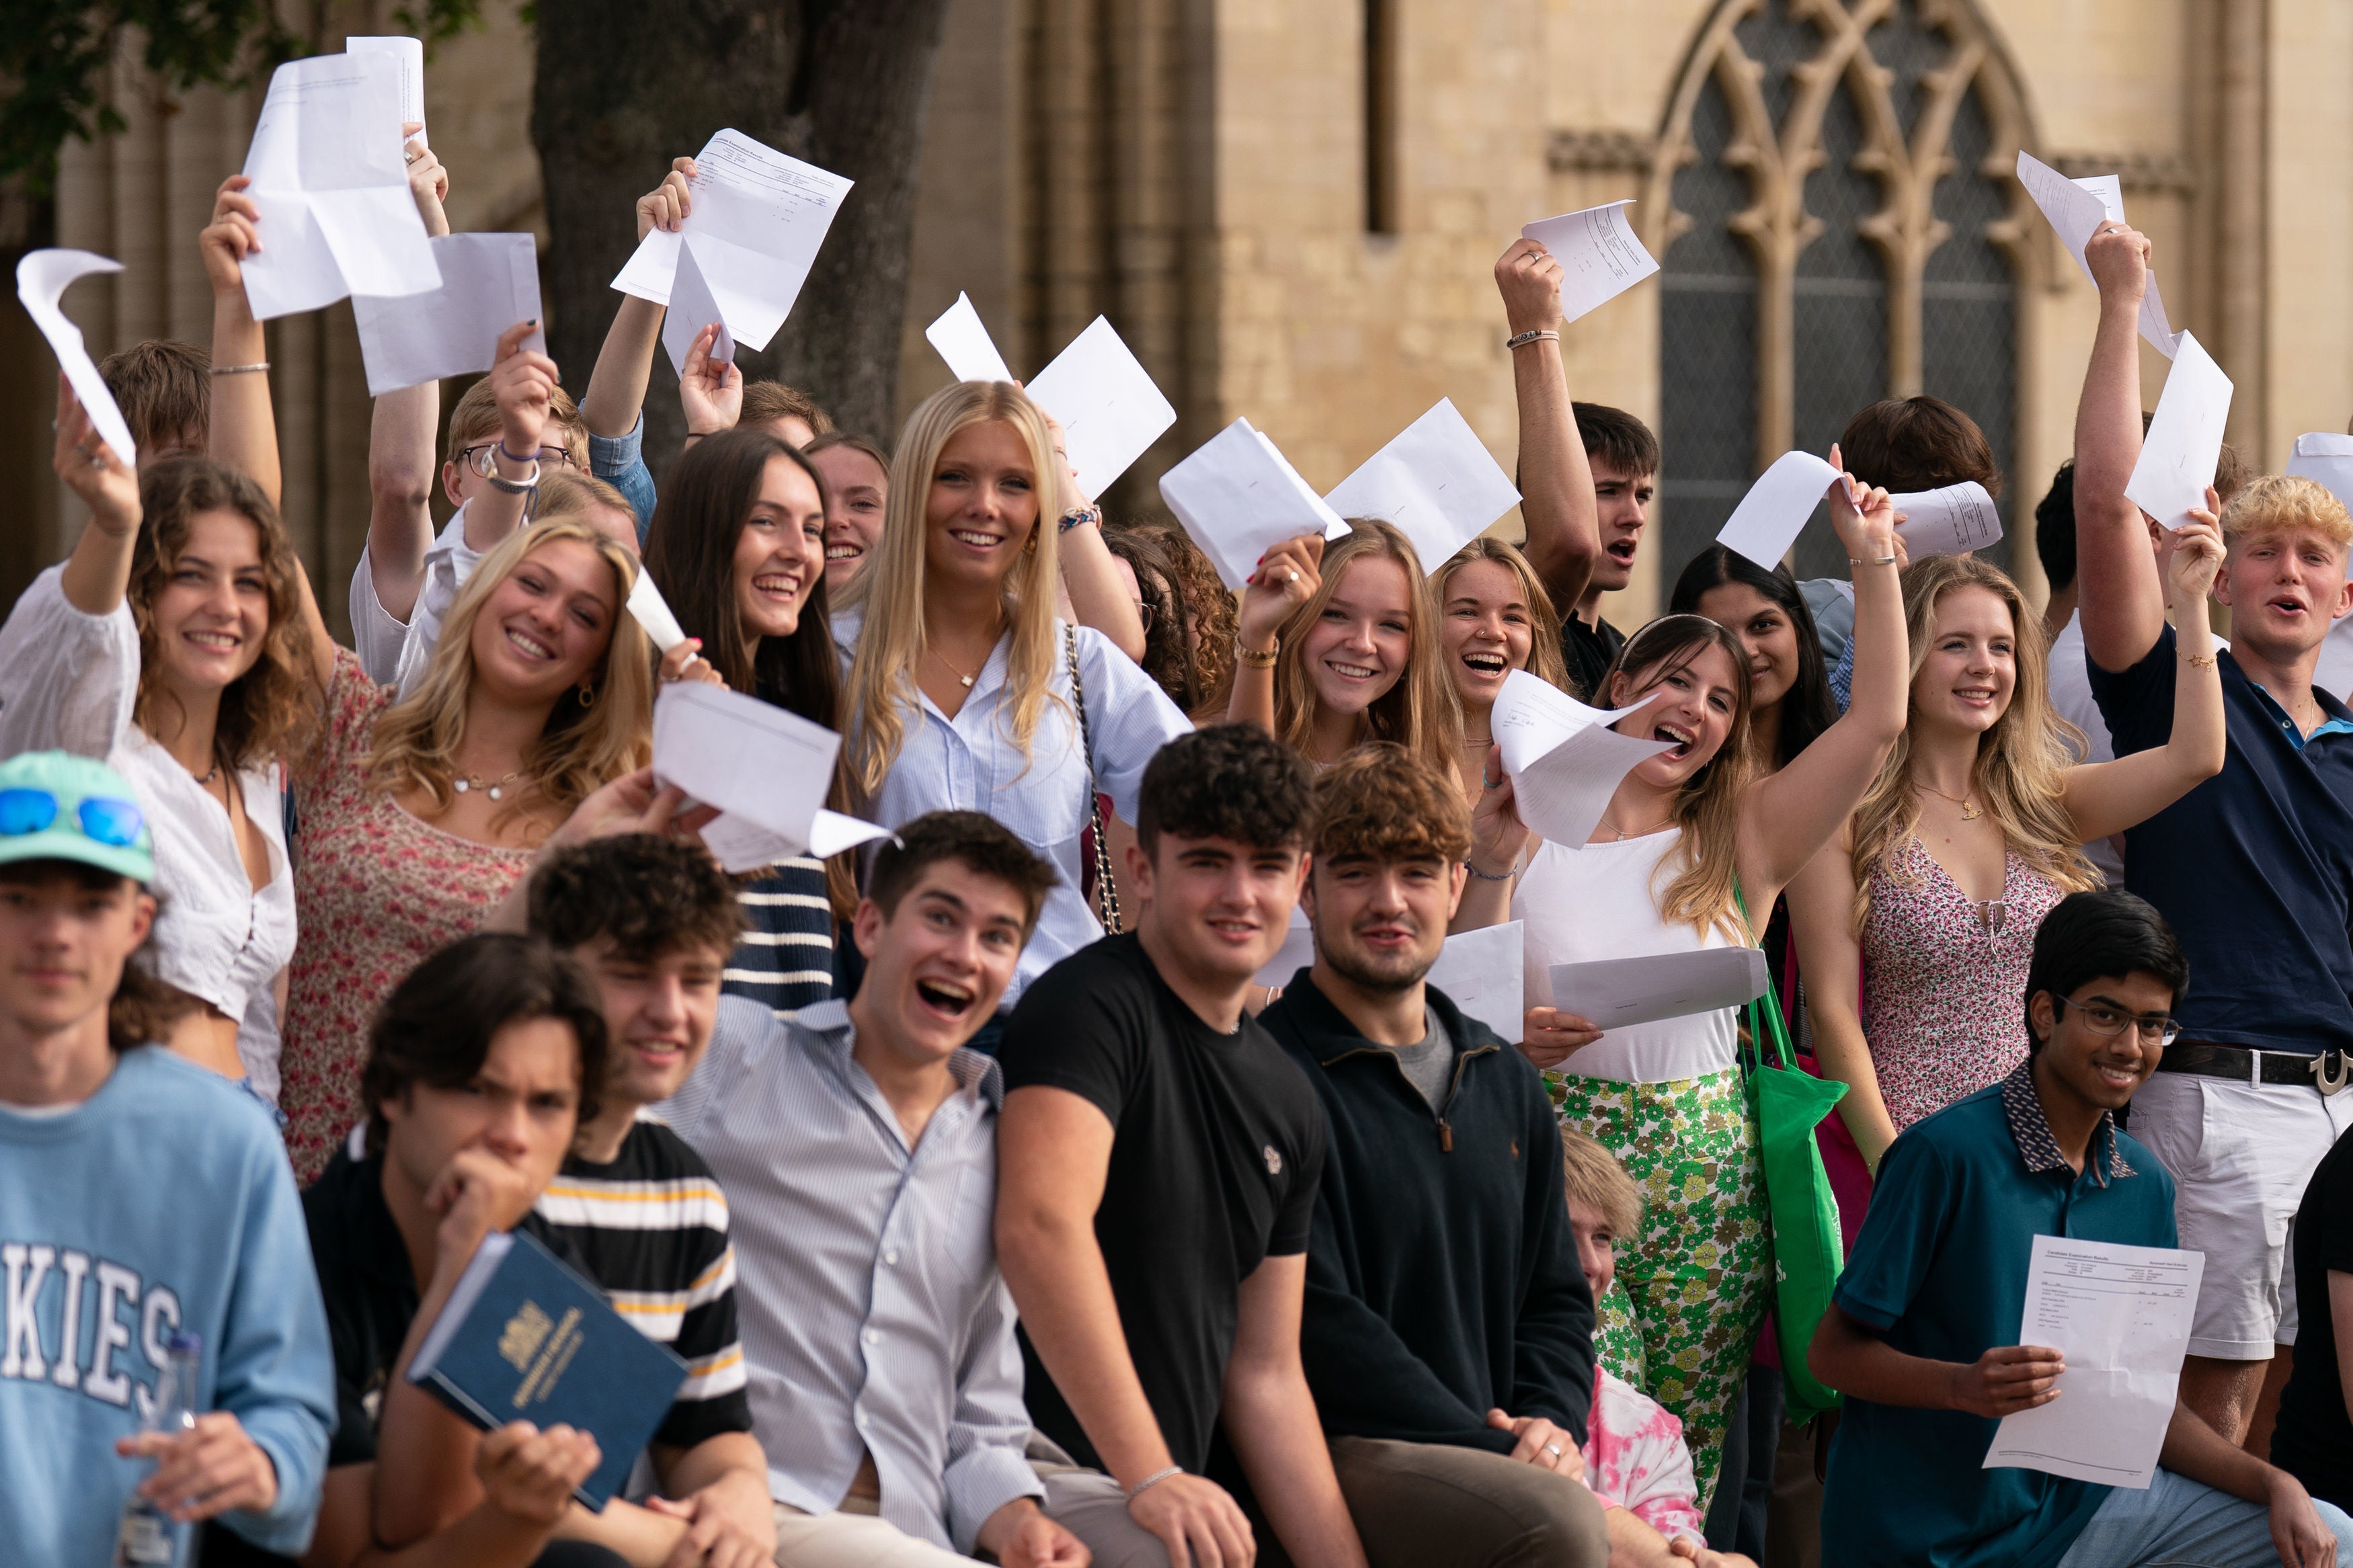 Students received their exam results on Thursday morning